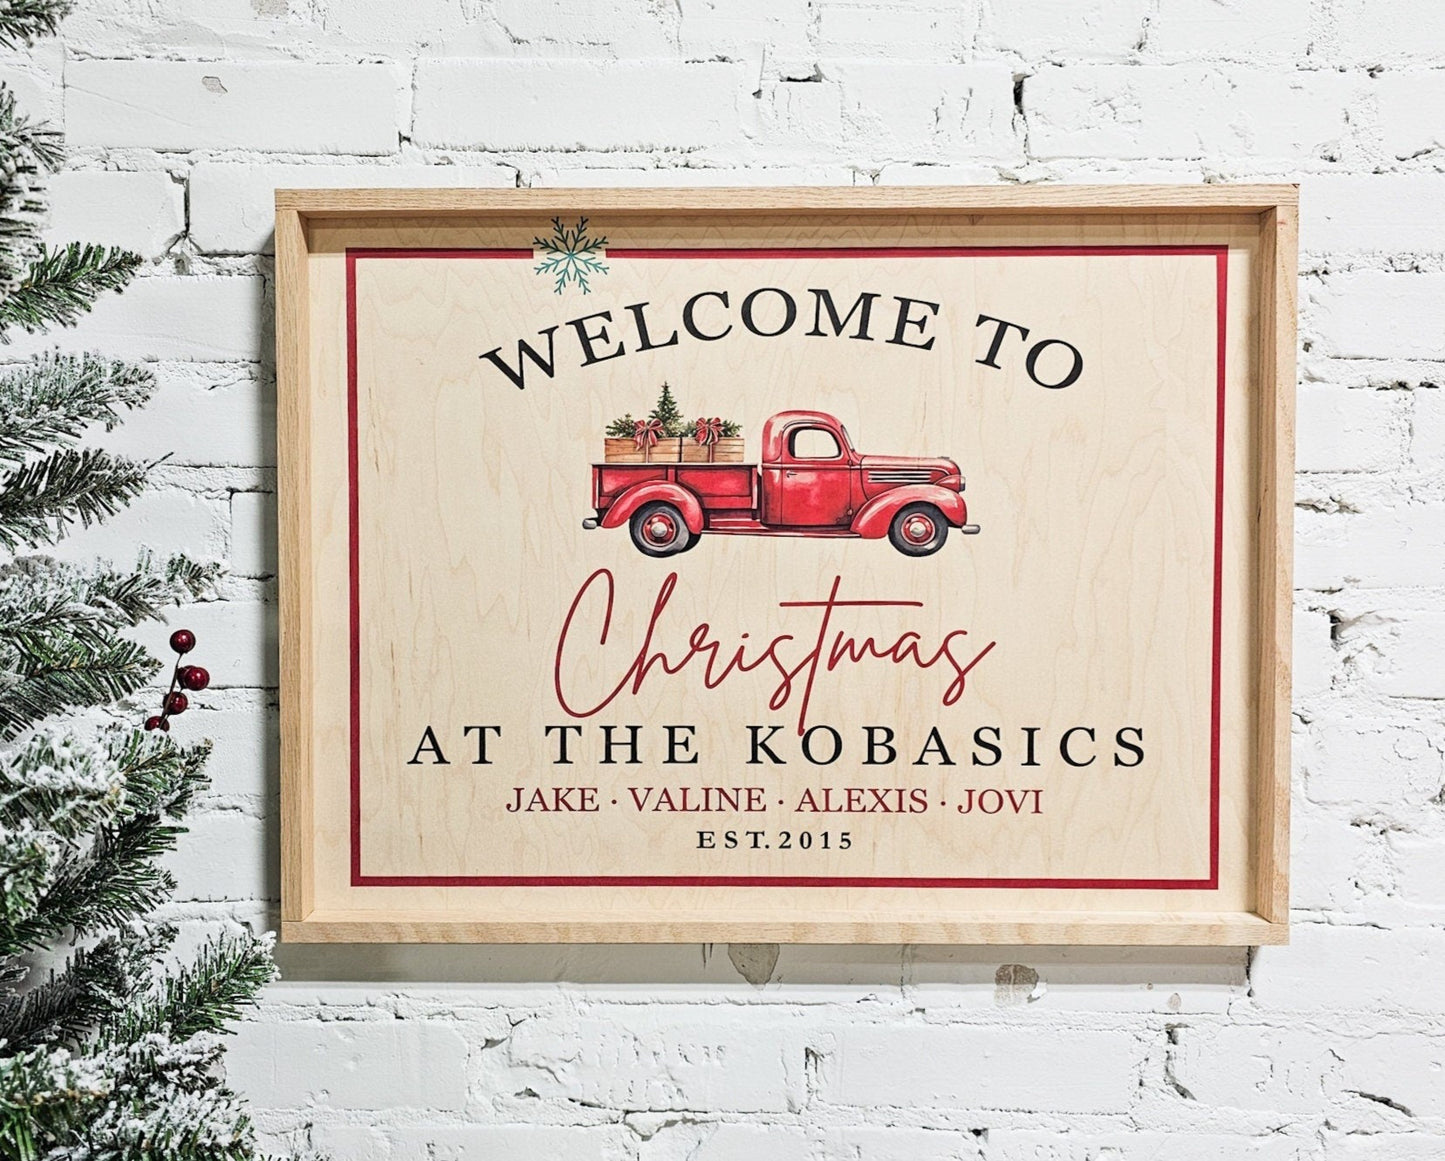 personalized christmas welcome sign with family last name and first names with est year. featuring a vintage little red christmas truck. design is printed on natural wood & framed with natural wood for a boho / farmhouse sign look